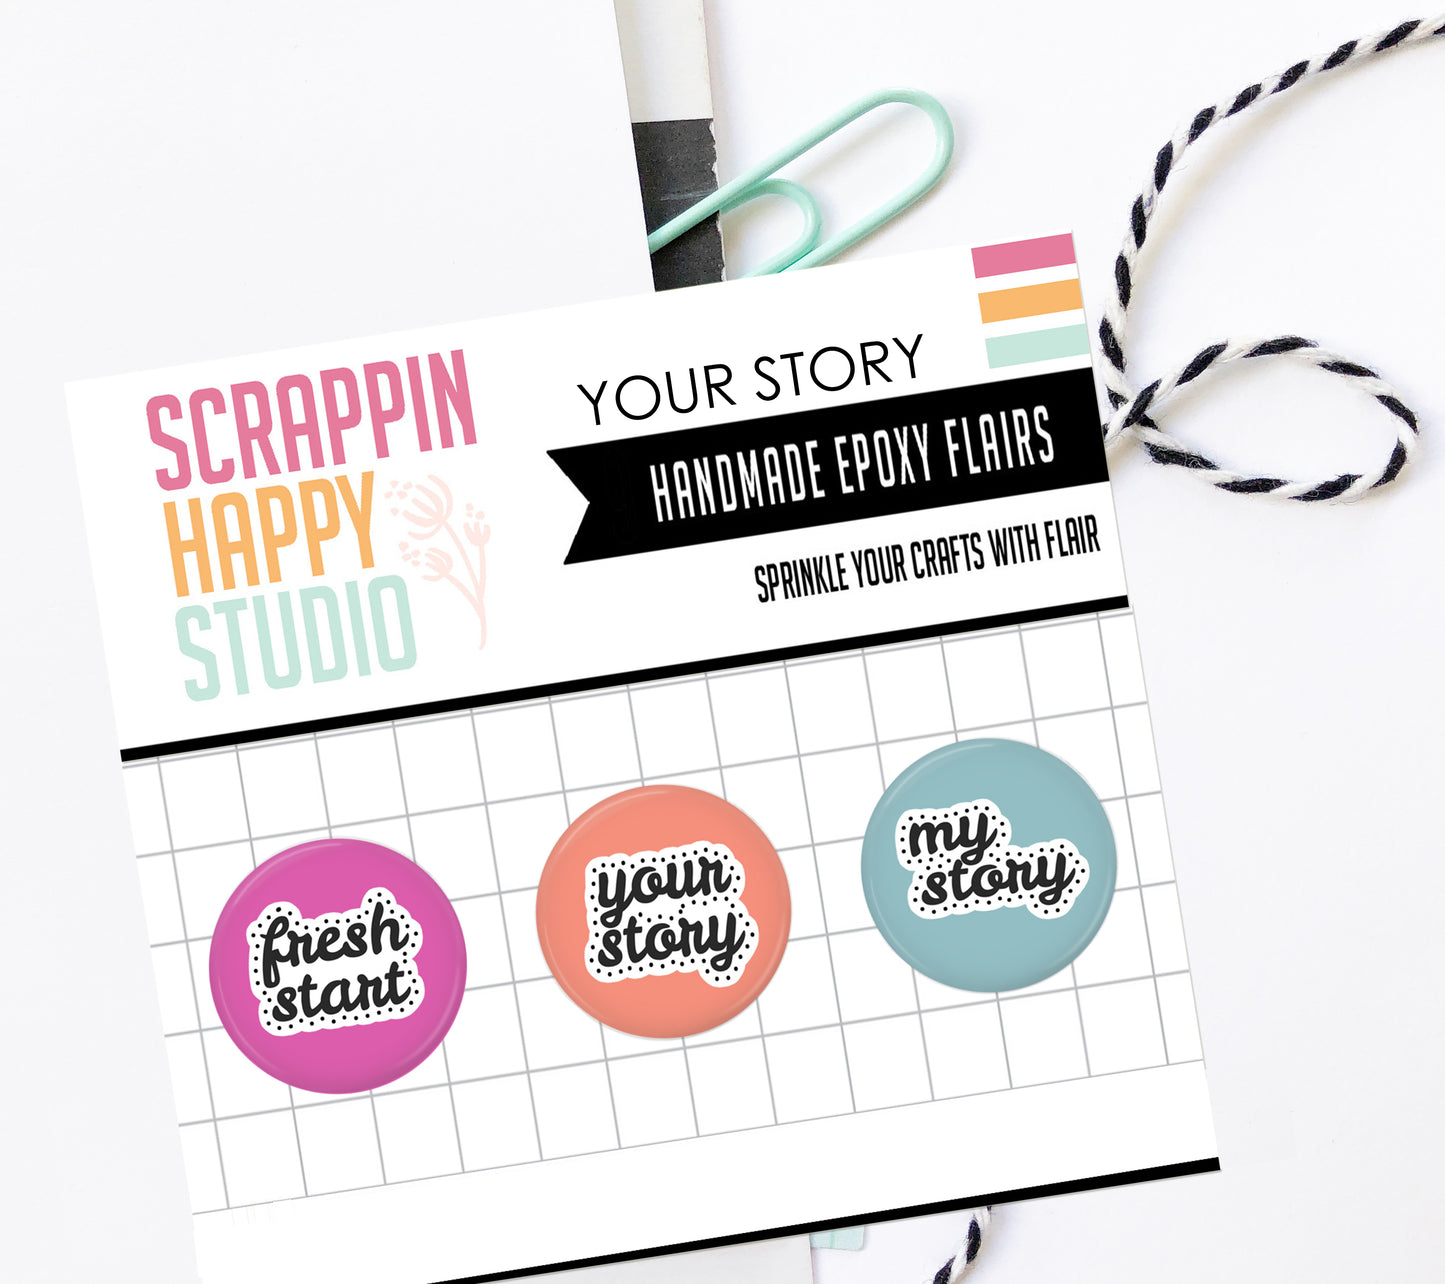 Your Story Epoxy Flair